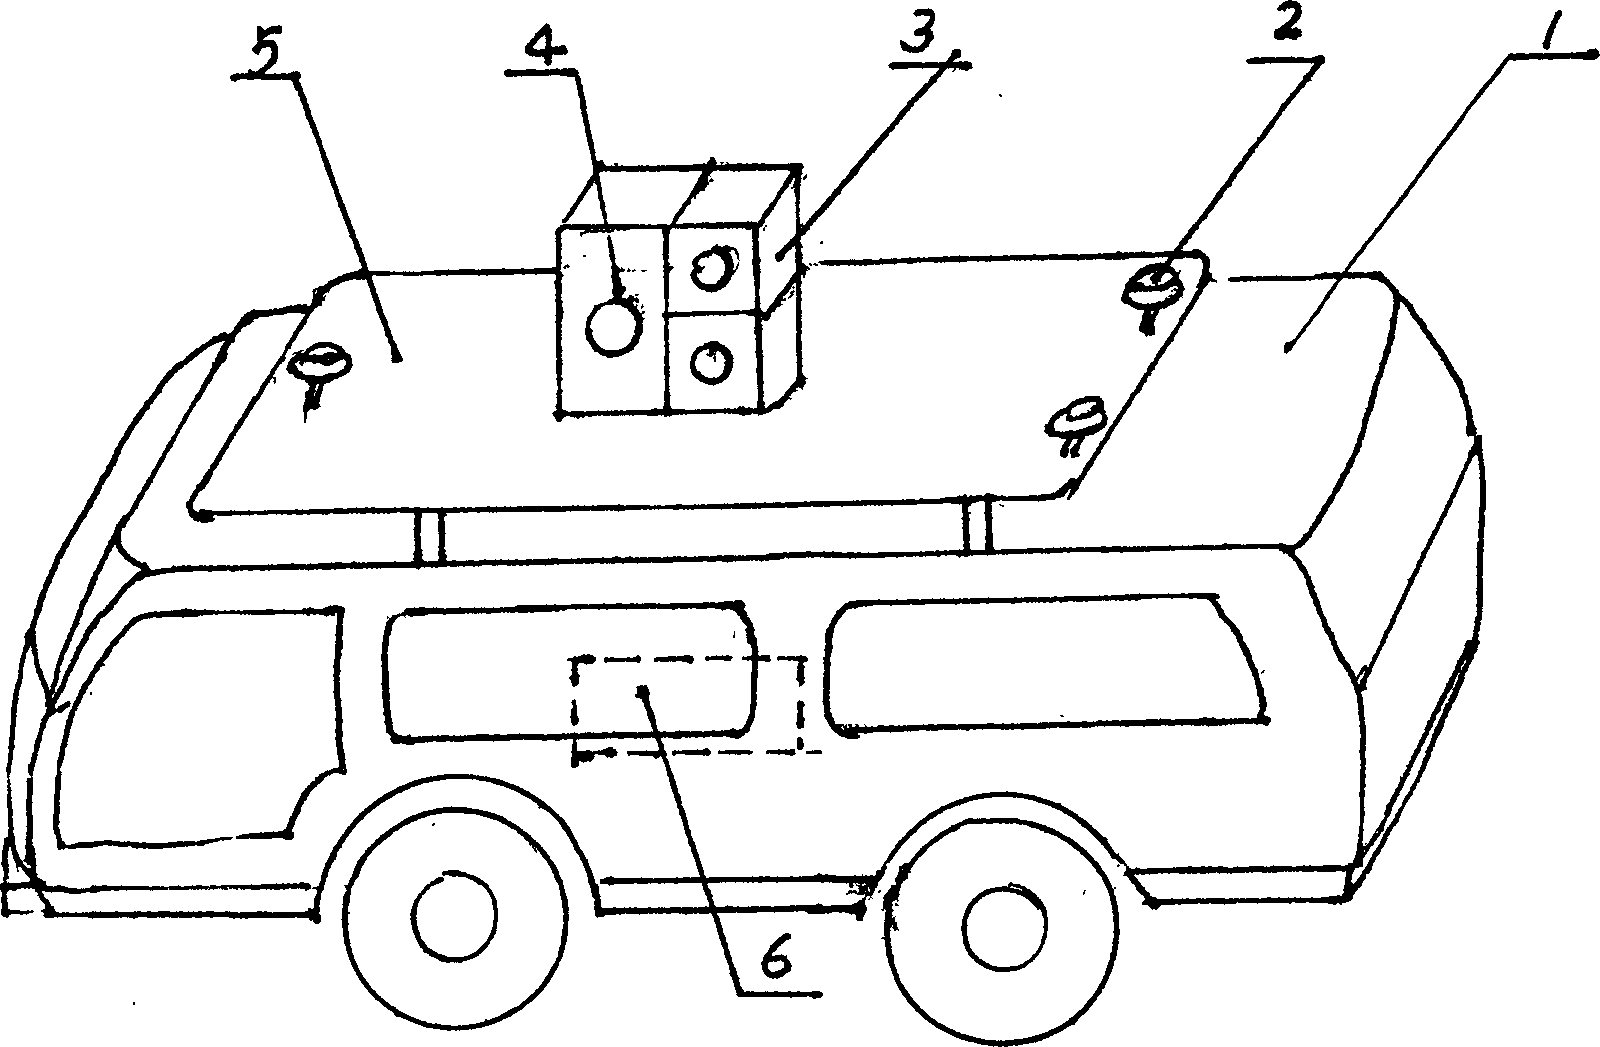 Vehicular three-dimensional measuring system and method for close-range target